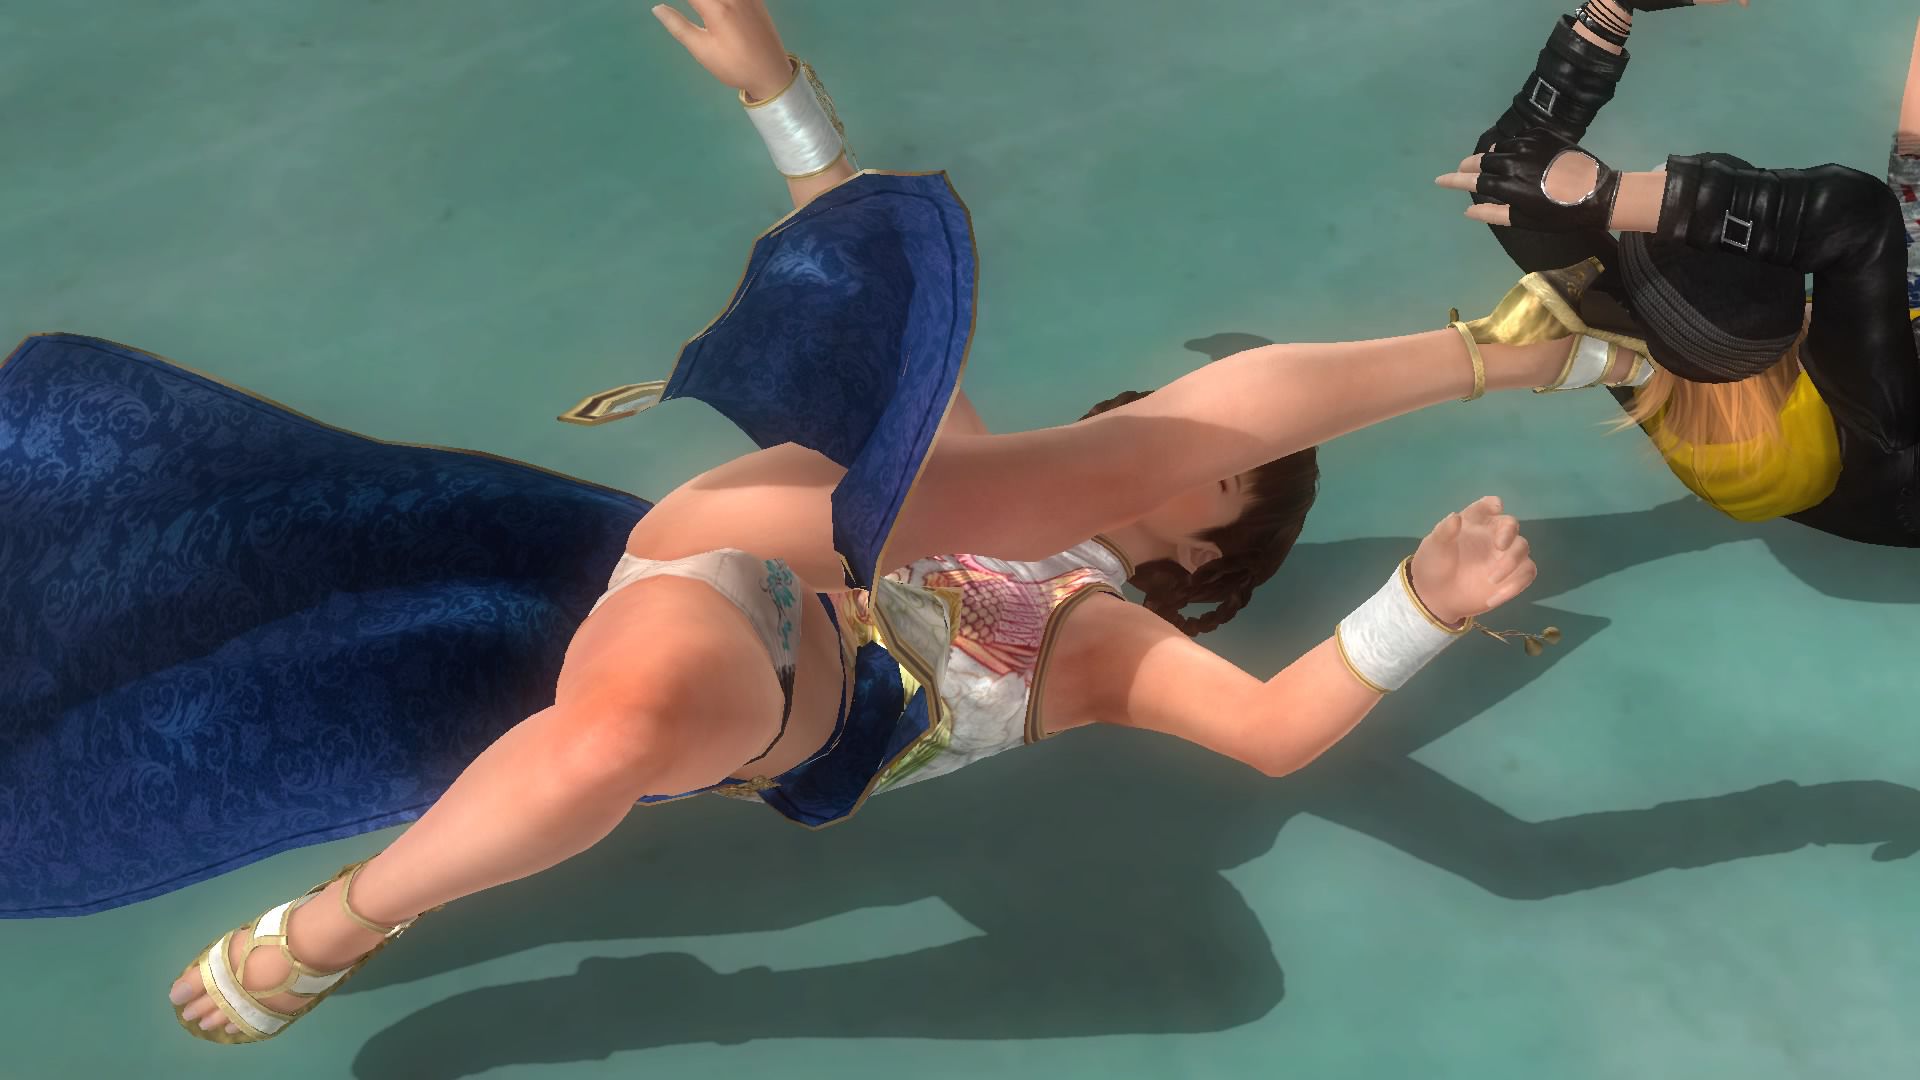 DOA5LR cheongsam delivery special! Elo slit not costume featured 7